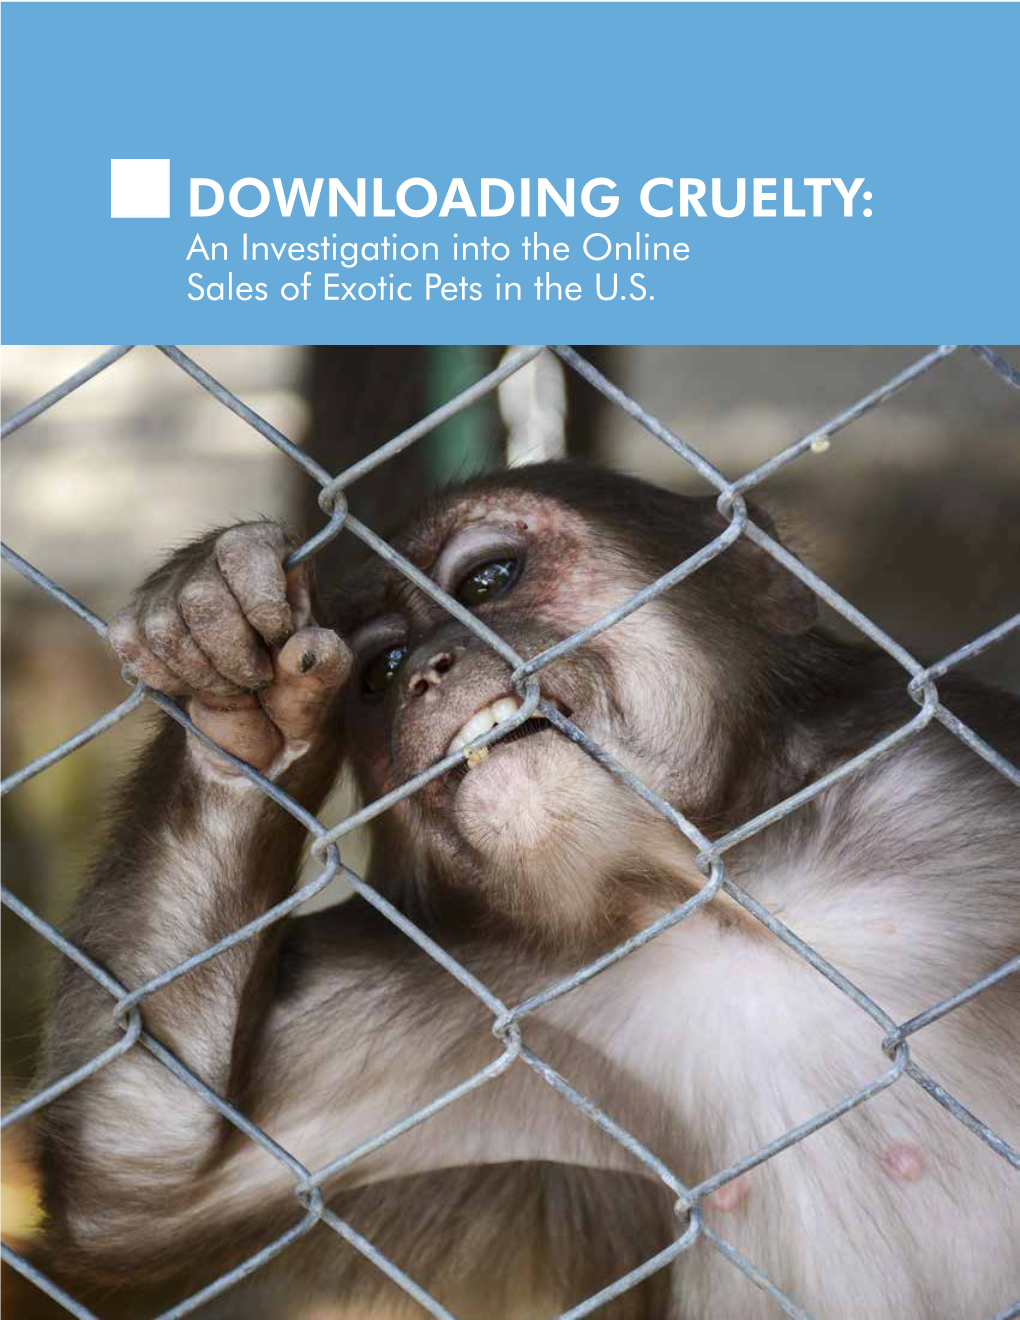 DOWNLOADING CRUELTY: an Investigation Into the Online Sales of Exotic Pets in the U.S